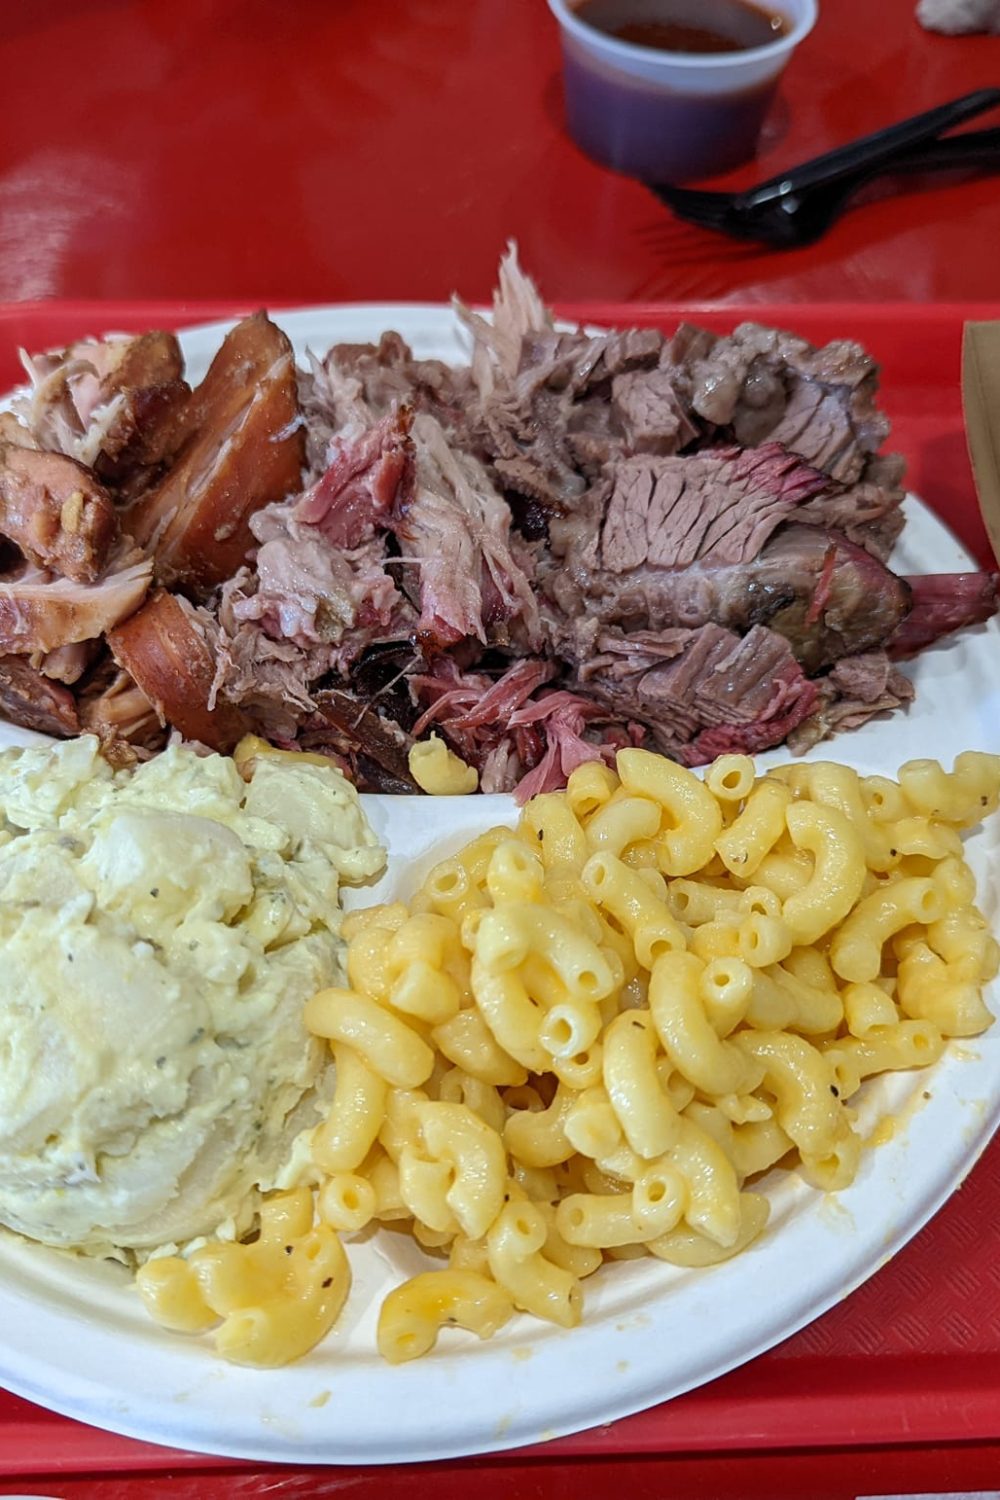 Three Meat platter with brisket, pulled pork and chicken along with potato salad and mac and cheese from IDK BBQ in Tropic, Utah.